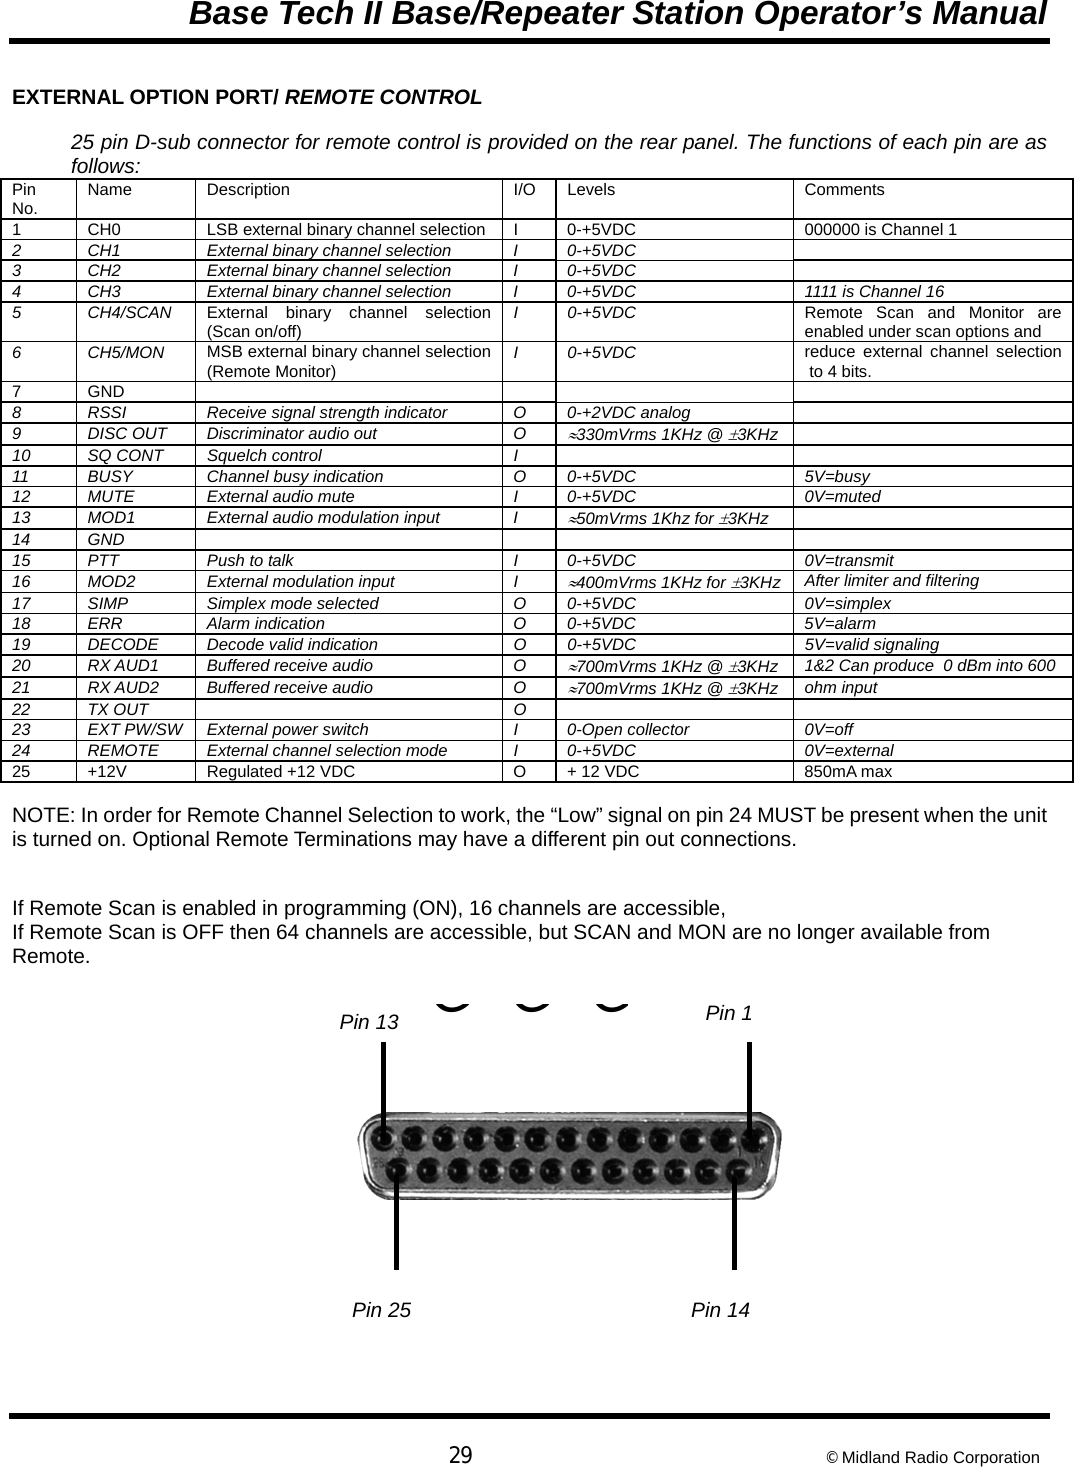 Base Tech II Base/Repeater Station Operator’s Manual  29 © Midland Radio Corporation EXTERNAL OPTION PORT/ REMOTE CONTROL 25 pin D-sub connector for remote control is provided on the rear panel. The functions of each pin are as follows: Pin No.  Name Description  I/O Levels  Comments 1  CH0  LSB external binary channel selection  I  0-+5VDC   000000 is Channel 1 2  CH1  External binary channel selection  I  0-+5VDC   3  CH2  External binary channel selection  I  0-+5VDC   4  CH3  External binary channel selection  I  0-+5VDC  1111 is Channel 16 5 CH4/SCAN External binary channel selection (Scan on/off)  I 0-+5VDC  Remote Scan and Monitor are enabled under scan options and  6 CH5/MON MSB external binary channel selection (Remote Monitor)  I 0-+5VDC  reduce external channel selection to 4 bits. 7 GND        8  RSSI  Receive signal strength indicator  O  0-+2VDC analog   9  DISC OUT  Discriminator audio out  O ≈330mVrms 1KHz @ ±3KHz   10  SQ CONT  Squelch control  I     11  BUSY  Channel busy indication  O  0-+5VDC   5V=busy 12  MUTE  External audio mute  I  0-+5VDC   0V=muted 13  MOD1  External audio modulation input  I ≈50mVrms 1Khz for ±3KHz   14 GND        15  PTT  Push to talk  I  0-+5VDC   0V=transmit 16  MOD2  External modulation input  I ≈400mVrms 1KHz for ±3KHz  After limiter and filtering 17  SIMP  Simplex mode selected  O  0-+5VDC   0V=simplex 18  ERR  Alarm indication  O  0-+5VDC   5V=alarm 19  DECODE  Decode valid indication  O  0-+5VDC   5V=valid signaling 20  RX AUD1  Buffered receive audio  O ≈700mVrms 1KHz @ ±3KHz  1&amp;2 Can produce  0 dBm into 600  21  RX AUD2  Buffered receive audio  O ≈700mVrms 1KHz @ ±3KHz  ohm input 22 TX OUT   O    23  EXT PW/SW  External power switch  I  0-Open collector   0V=off 24  REMOTE  External channel selection mode  I  0-+5VDC   0V=external 25  +12V  Regulated +12 VDC  O  + 12 VDC  850mA max NOTE: In order for Remote Channel Selection to work, the “Low” signal on pin 24 MUST be present when the unit is turned on. Optional Remote Terminations may have a different pin out connections.  If Remote Scan is enabled in programming (ON), 16 channels are accessible, If Remote Scan is OFF then 64 channels are accessible, but SCAN and MON are no longer available from Remote.  ‡@@@@‡Pin 13  Pin 1 Pin 25  Pin 14 